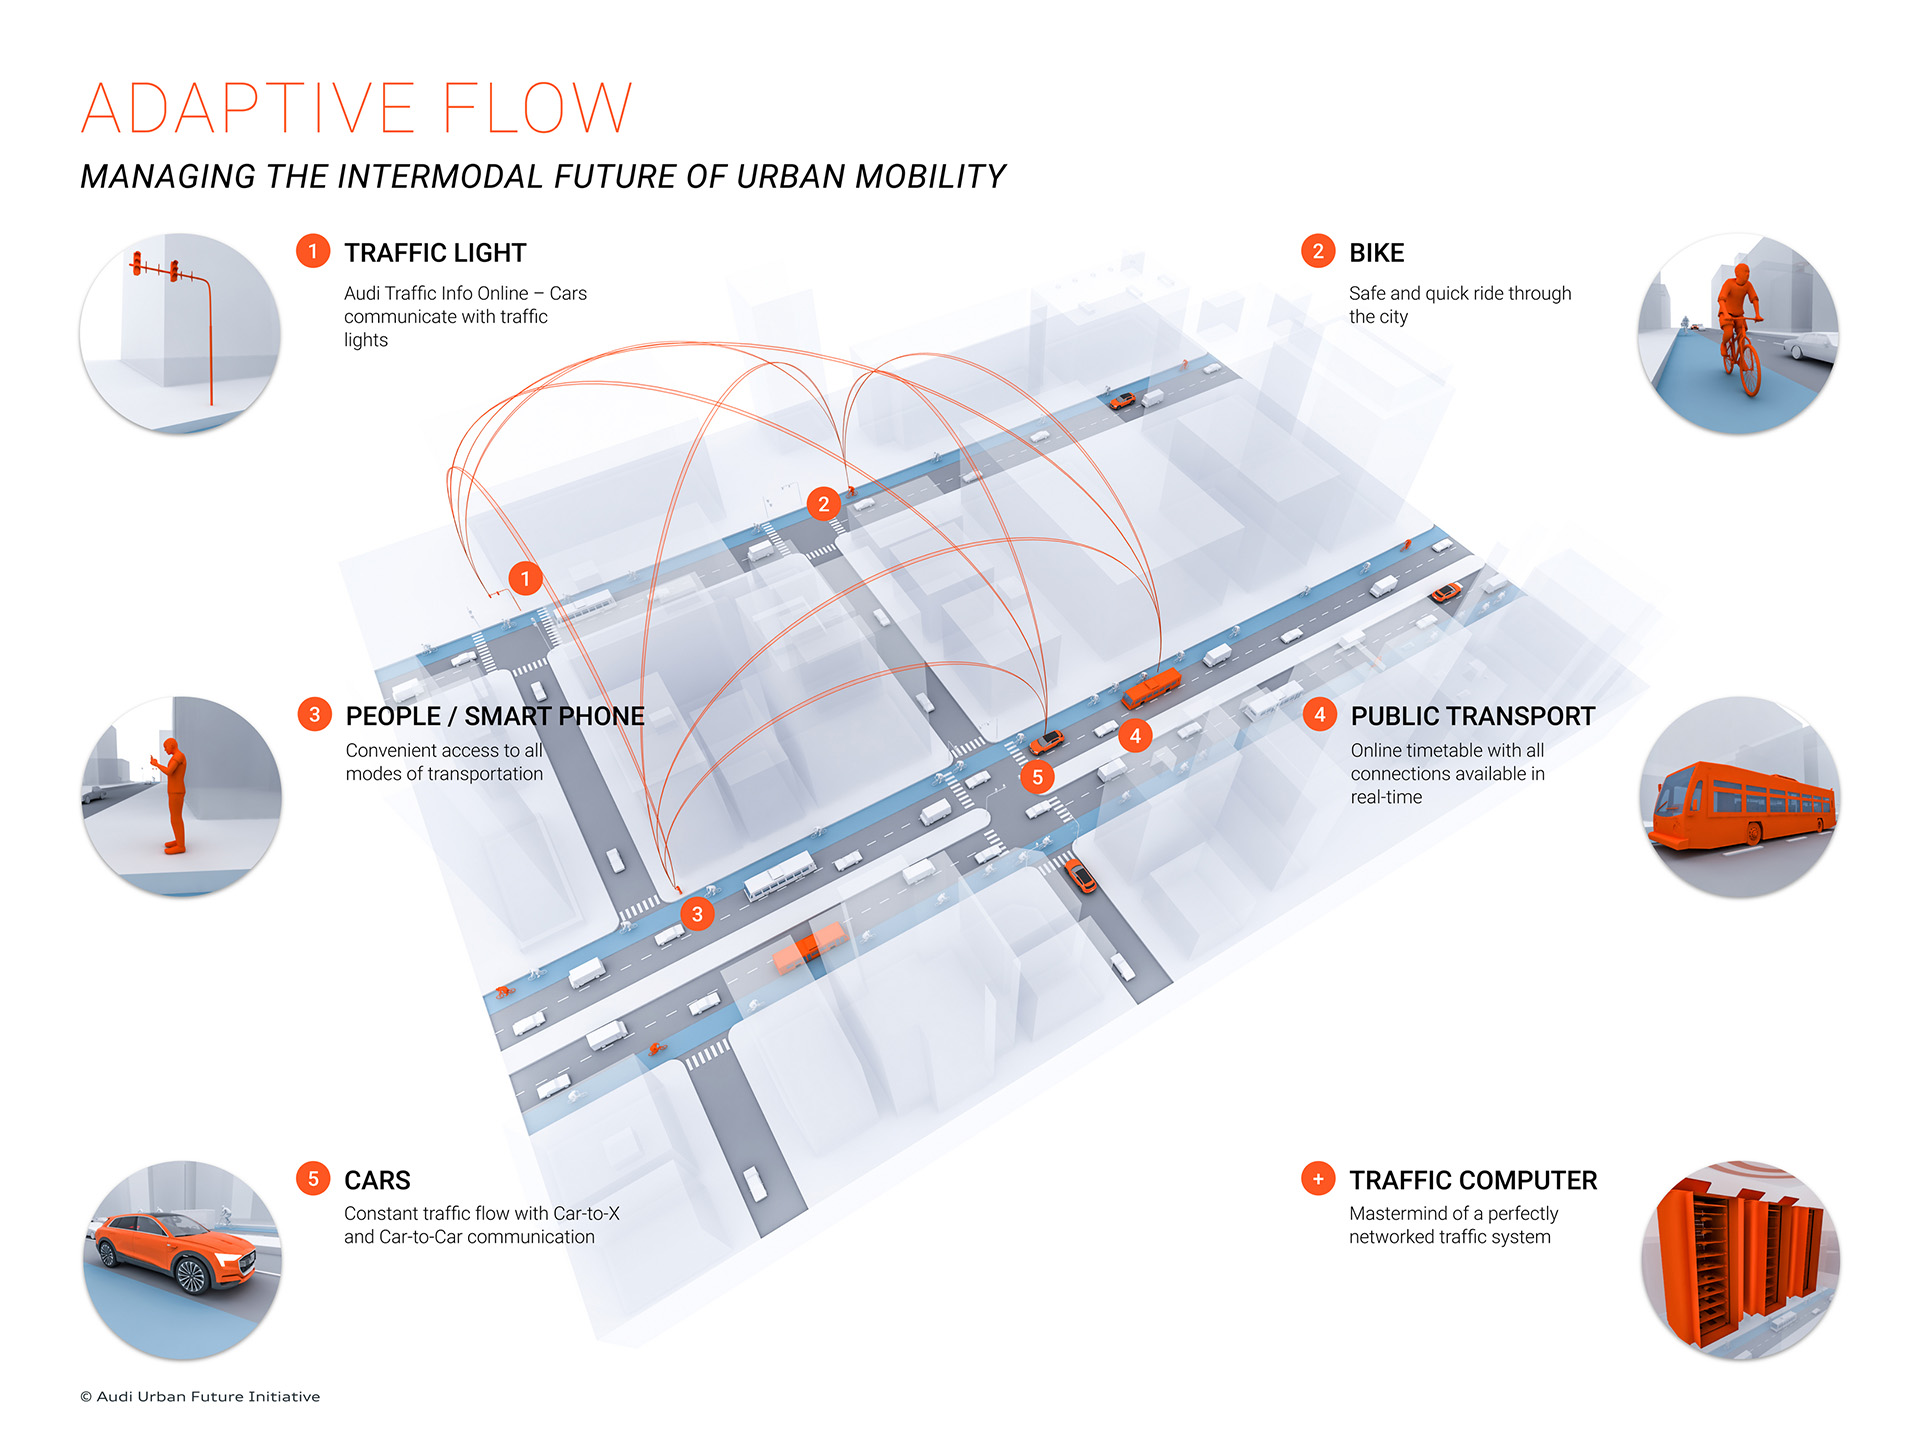 Adaptable flows that can articulate based on traffic and city needs